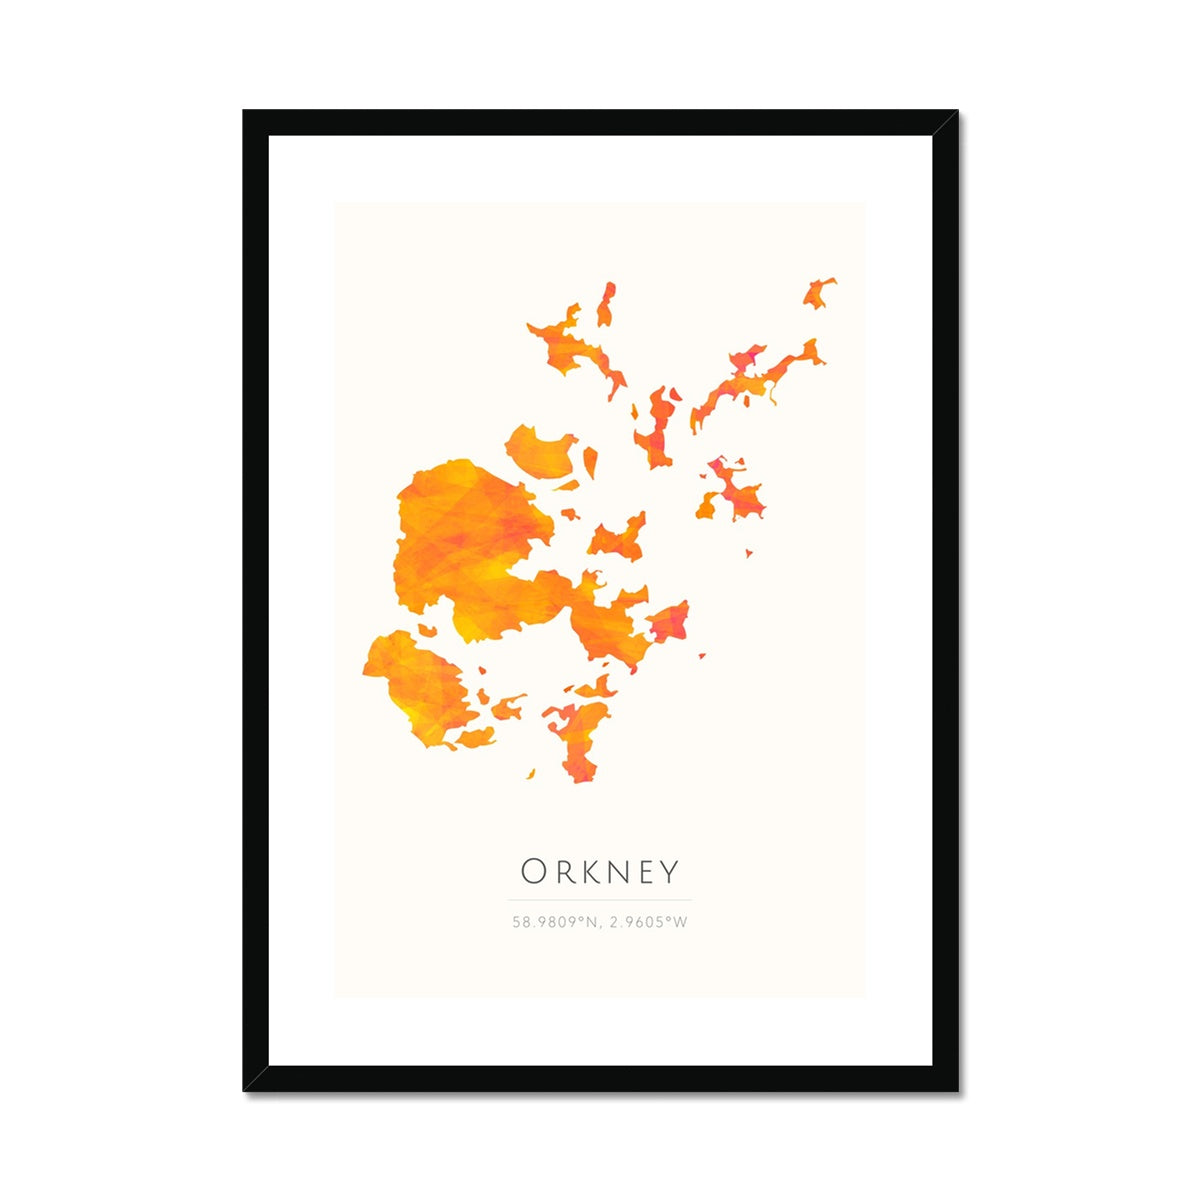 Custom Map for Ruth - Orkney Framed & Mounted Print